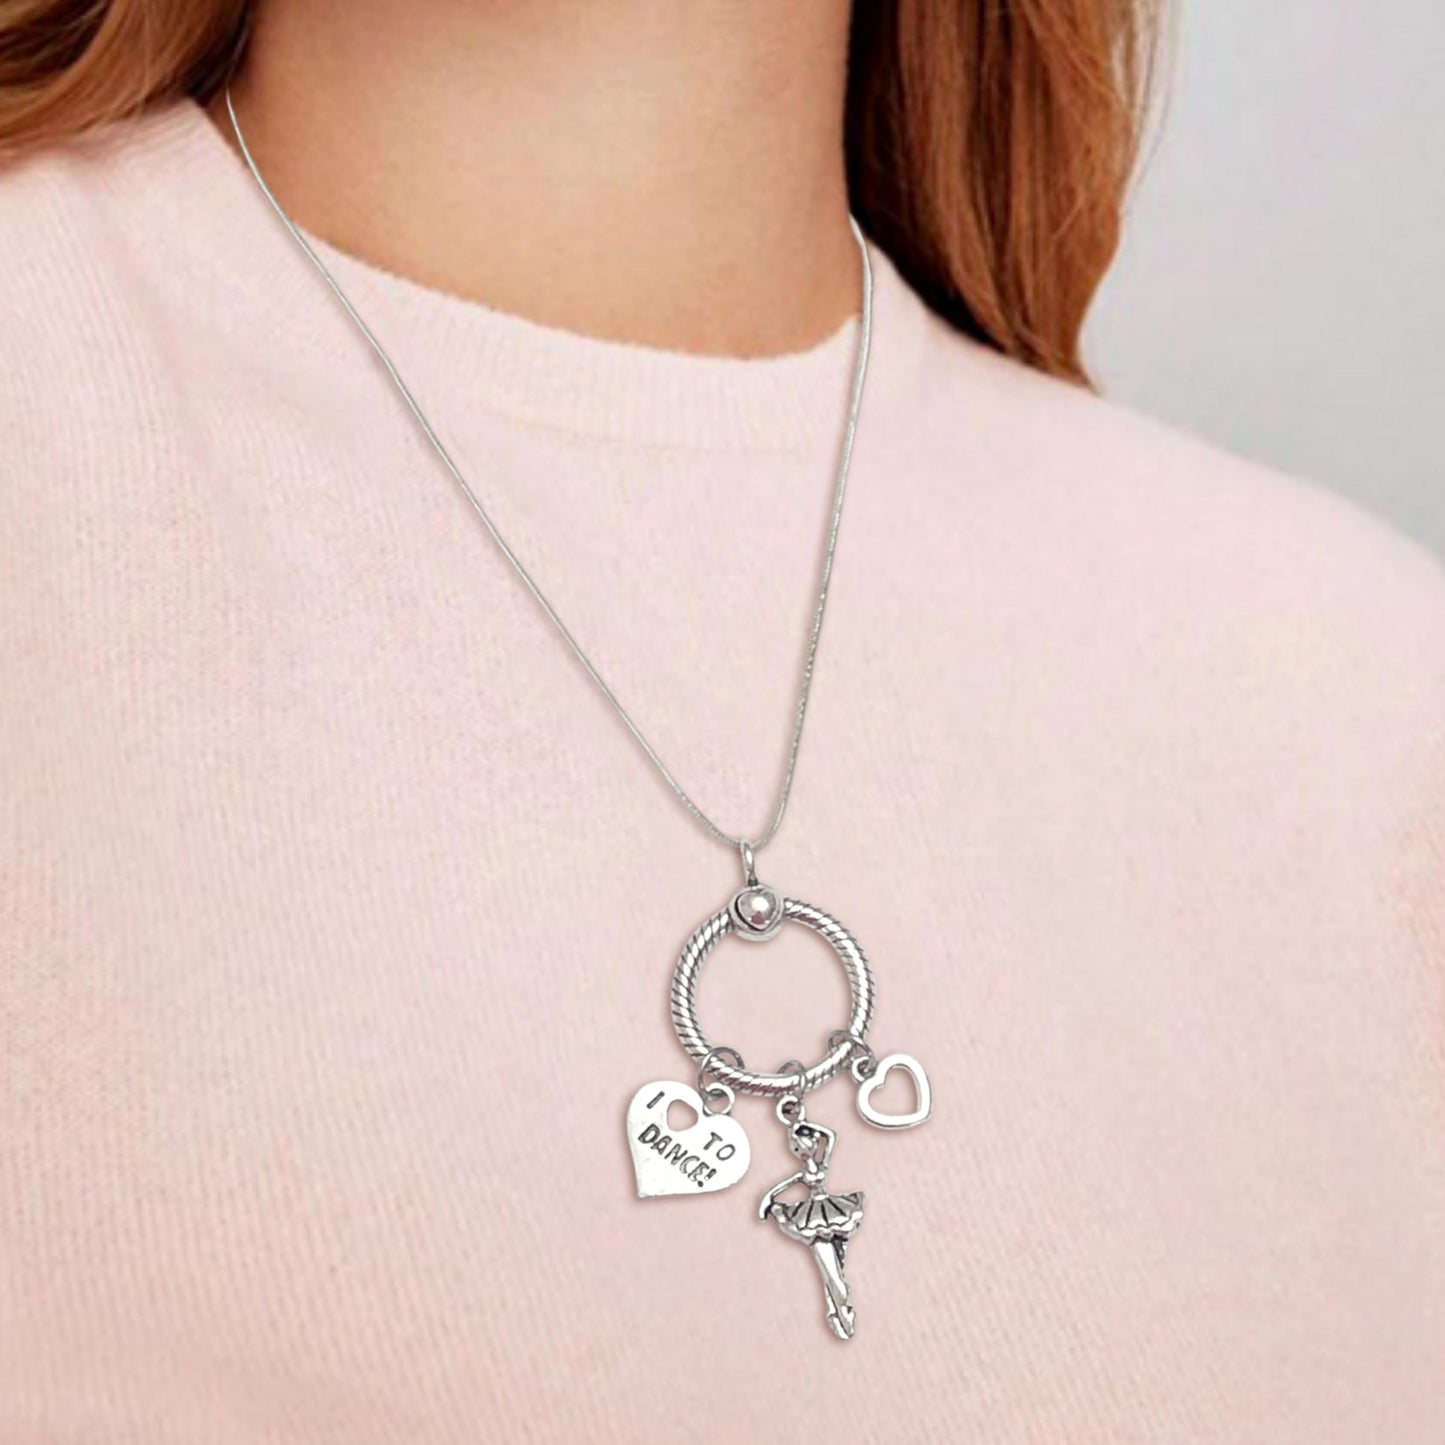 Gymnastics Sterling Silver Necklace with Charm Holder - Cheer and Dance On Demand